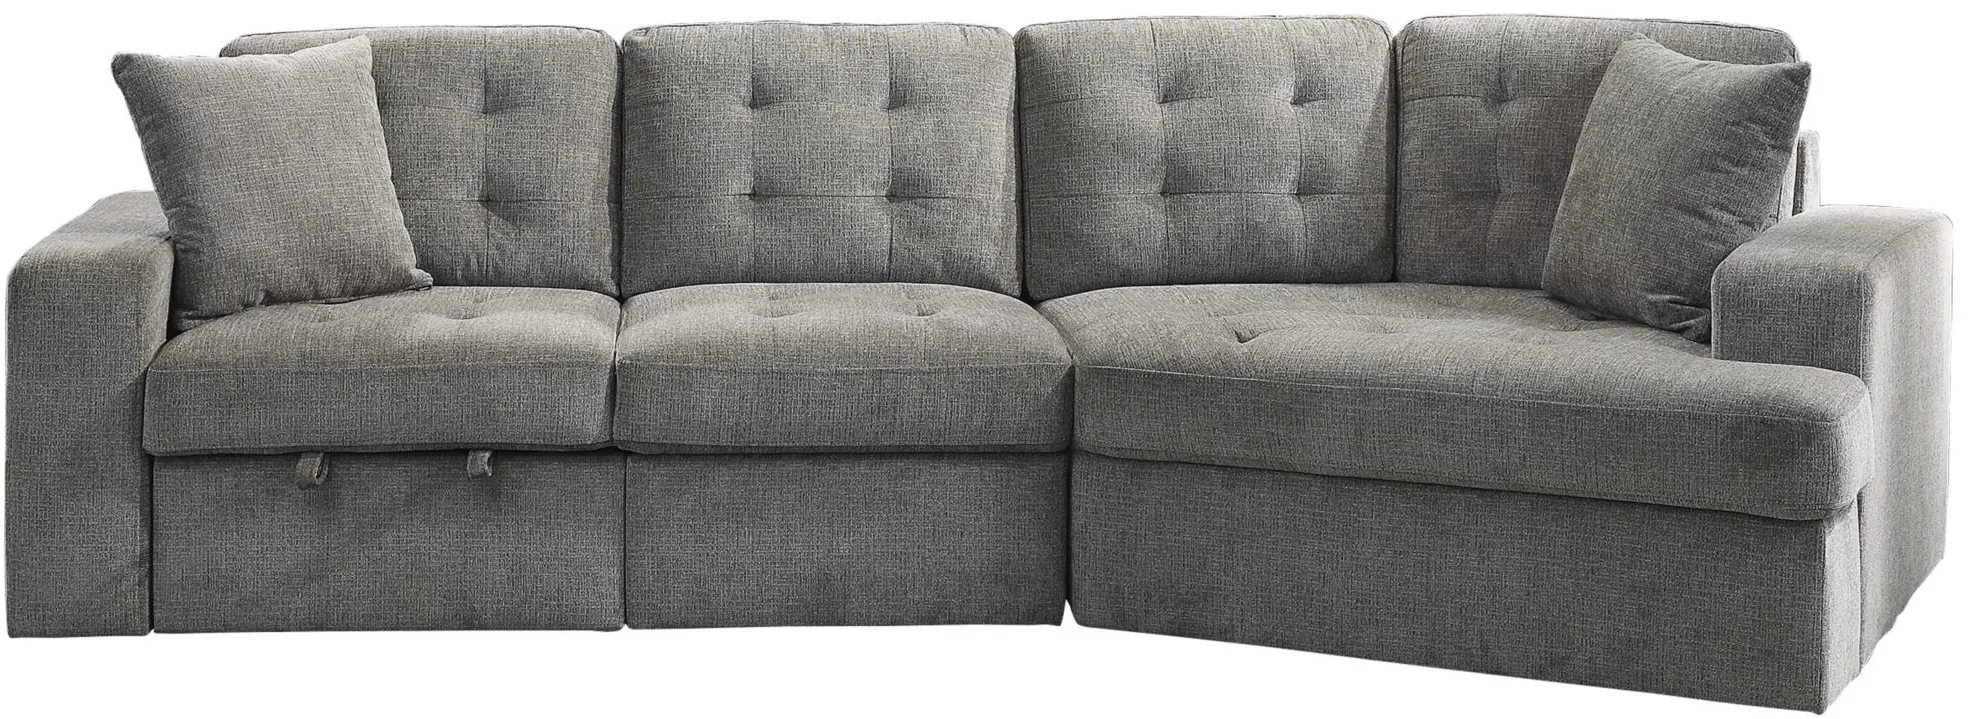 Tonya 2-pc. Sectional Sofa in Gray by Homelegance